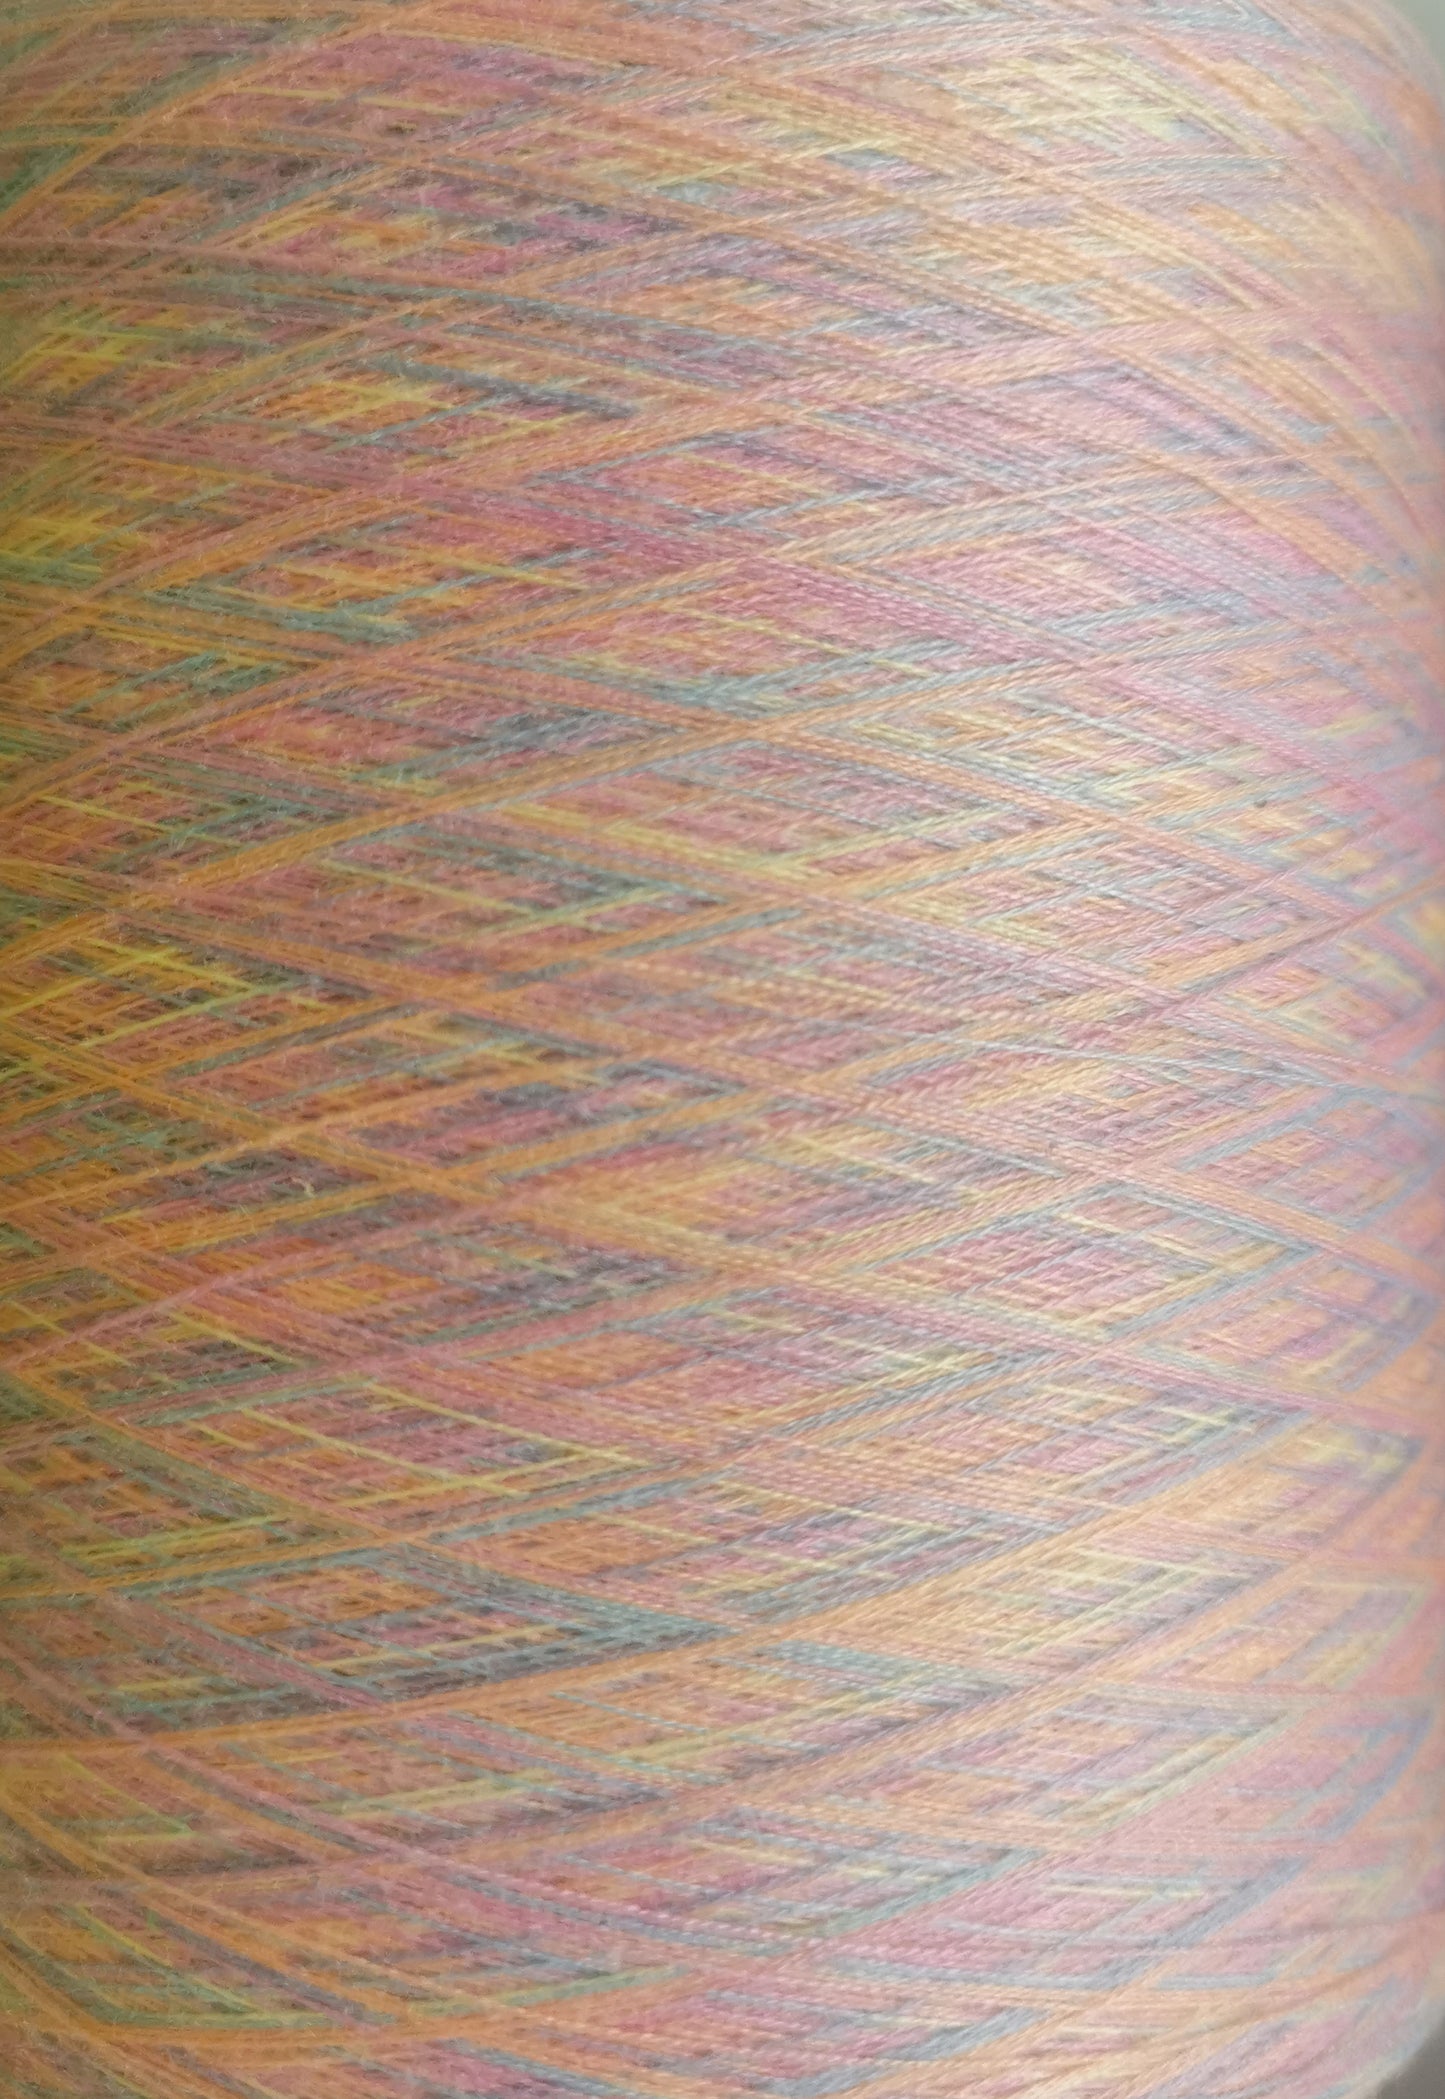 space dyed thread